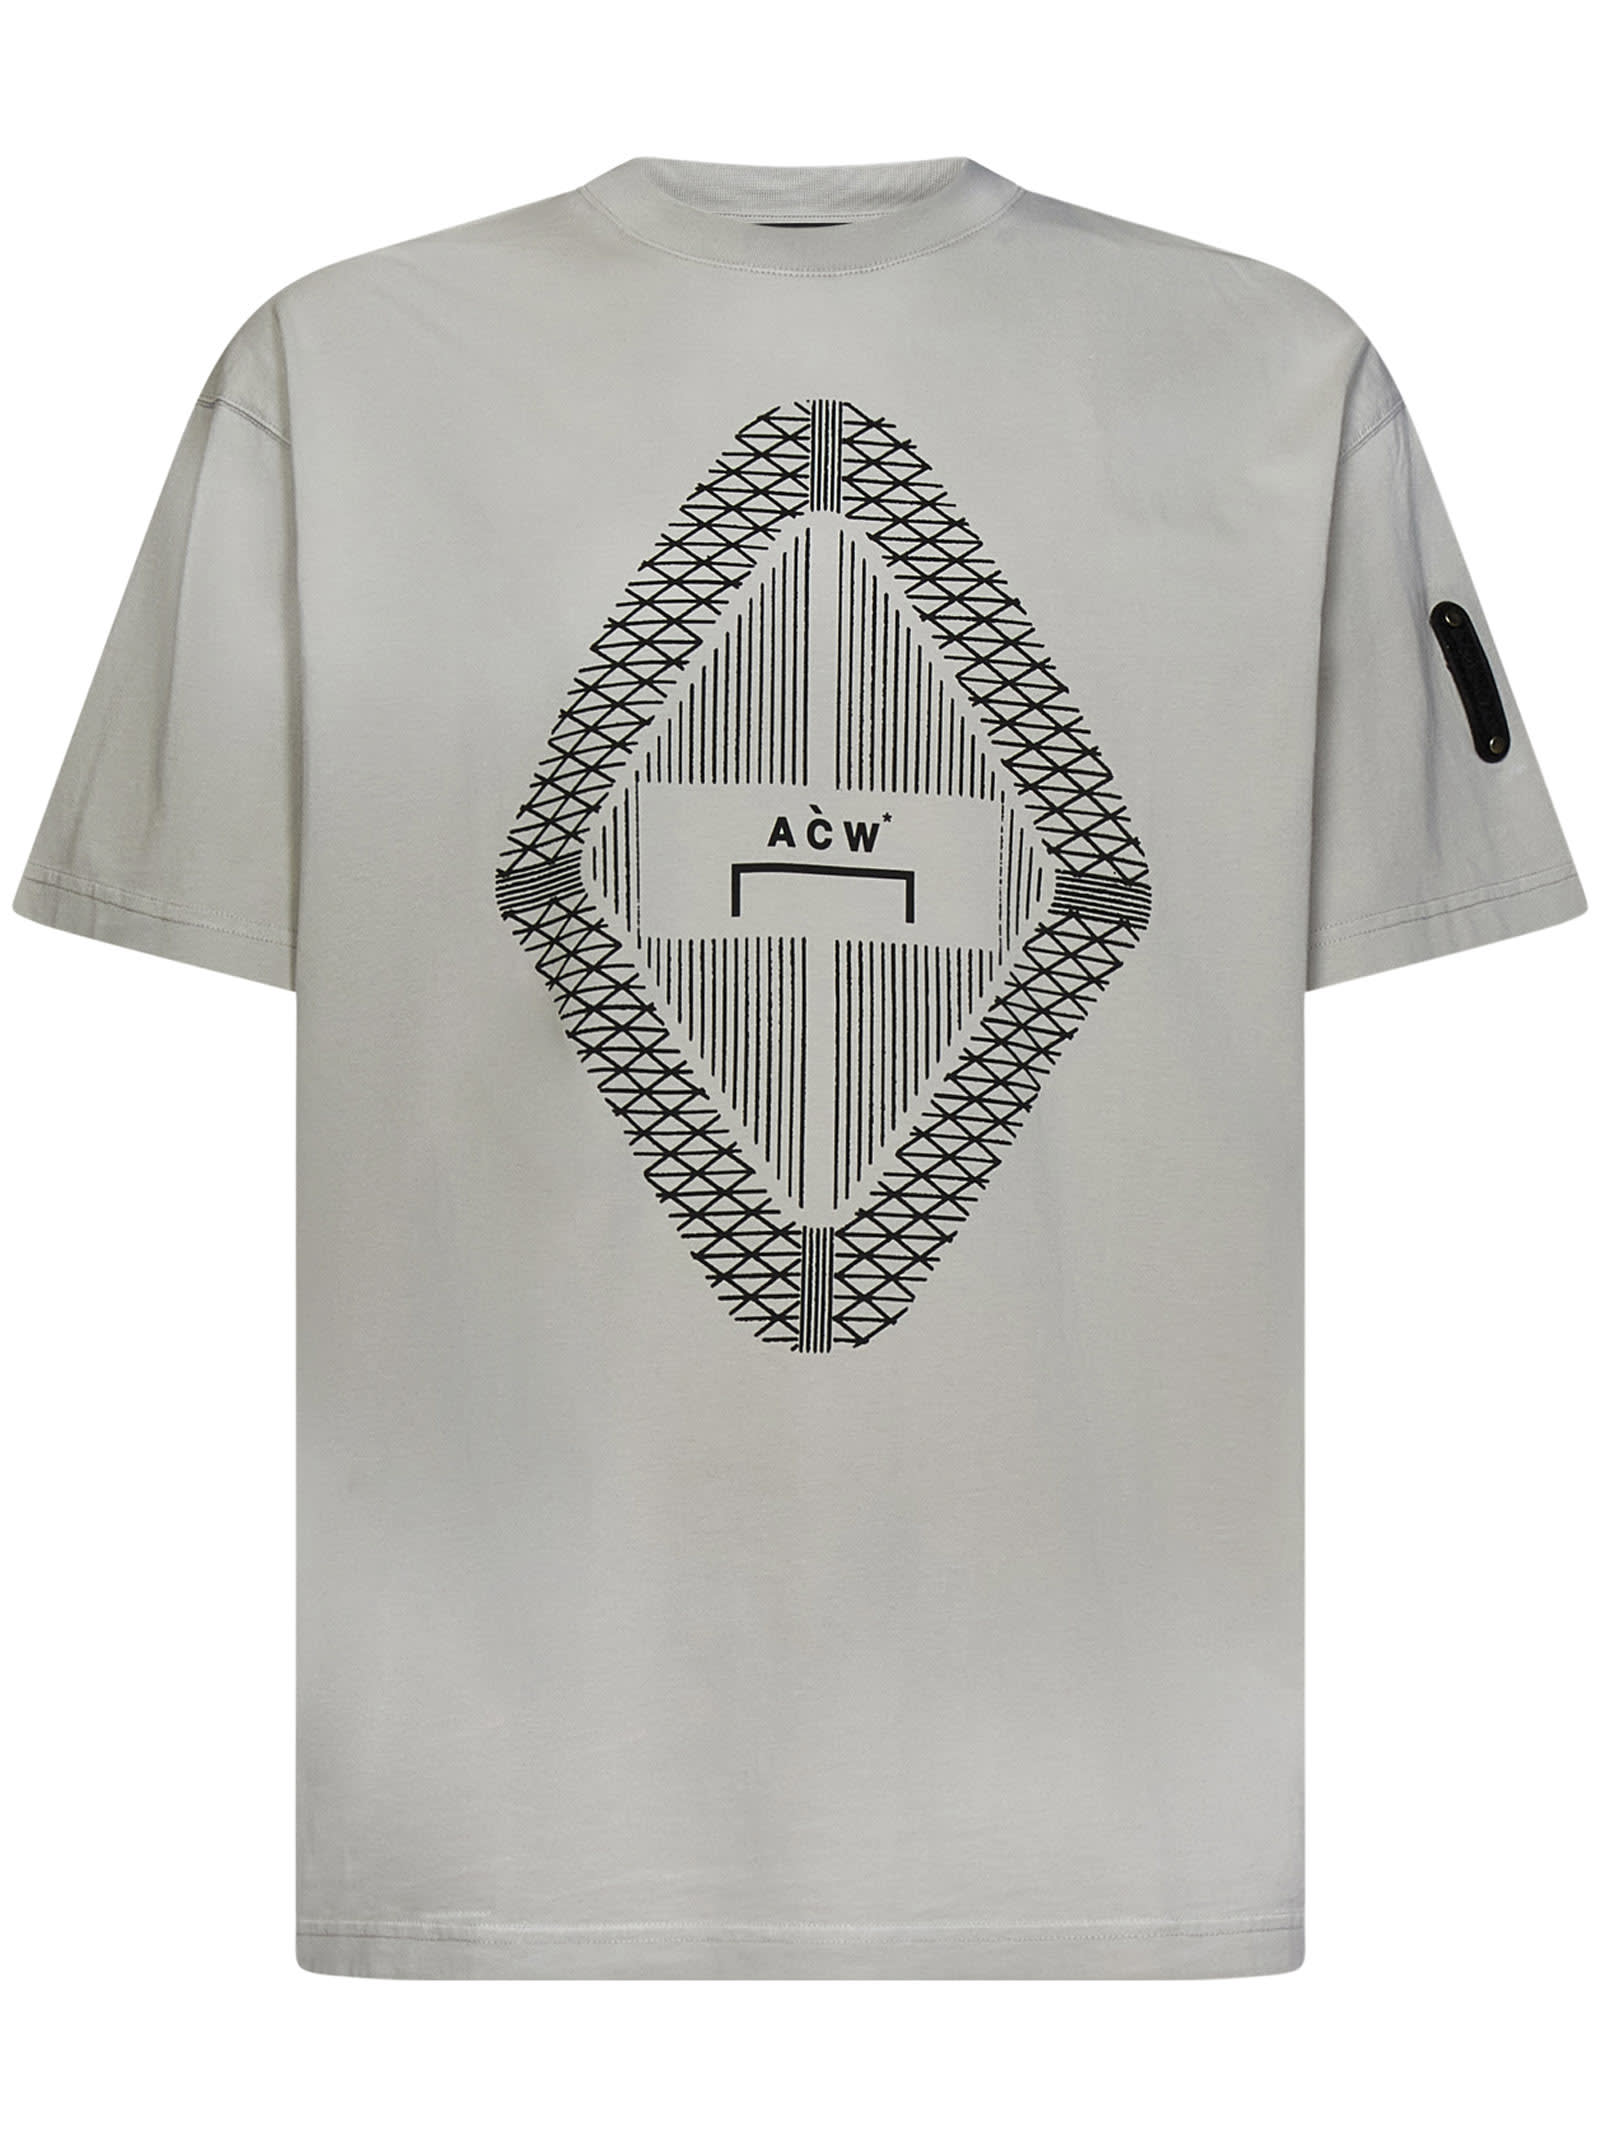 A-COLD-WALL Gradient T-shirt